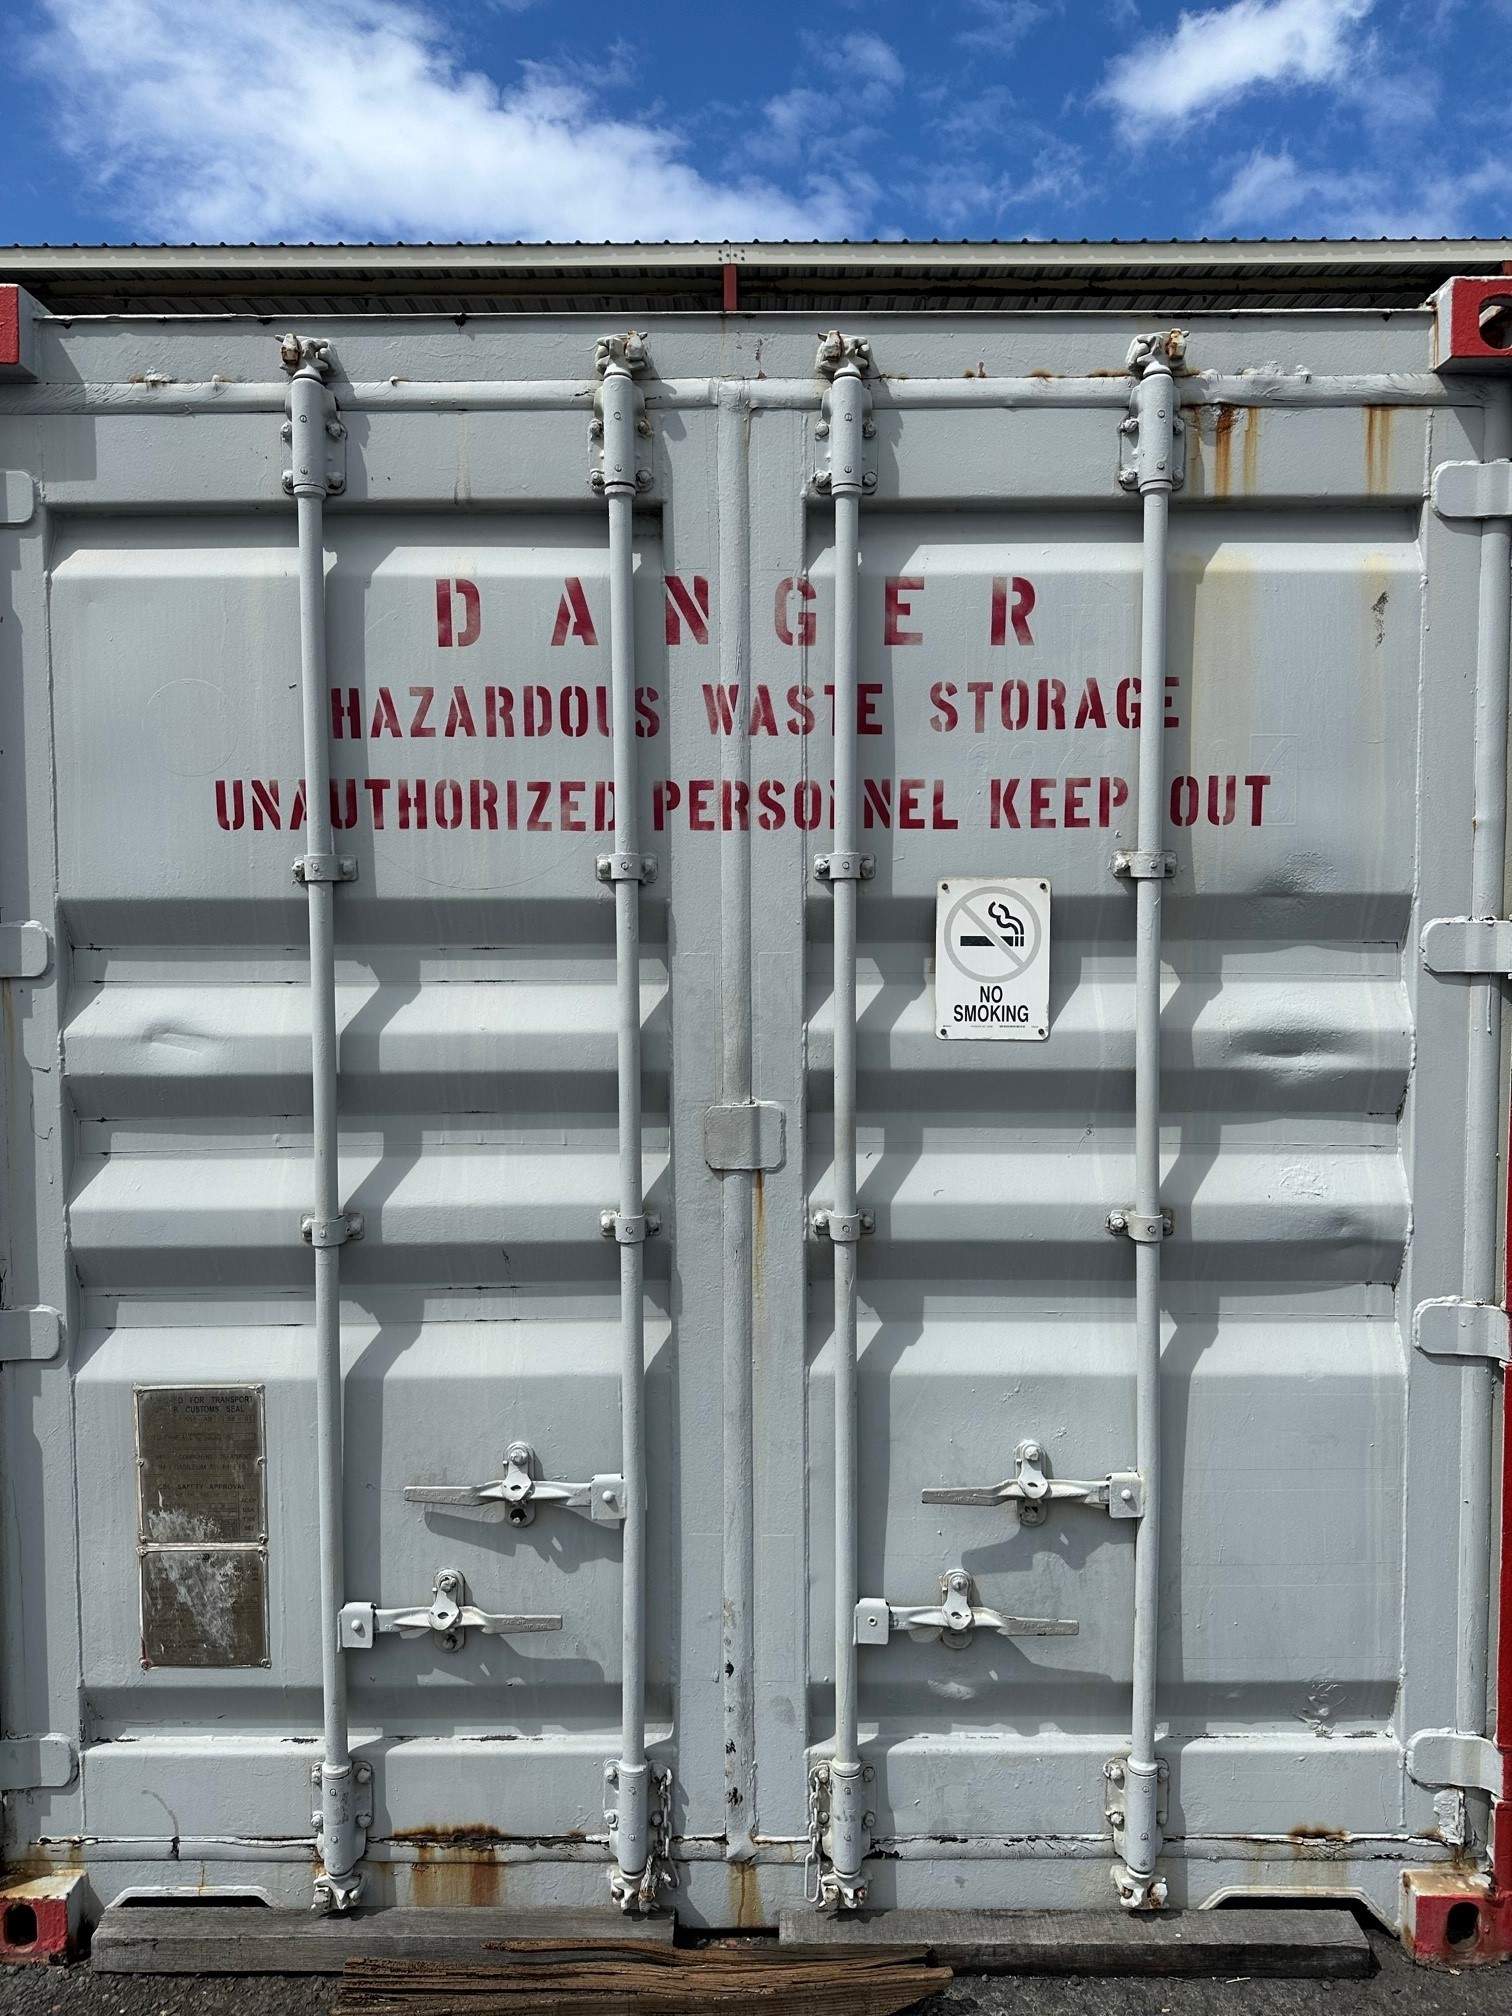 Gray container marked "DANGER Hazardous Waste Storage Unauthorized Personnel Keep Out" in red sits at a terminal.